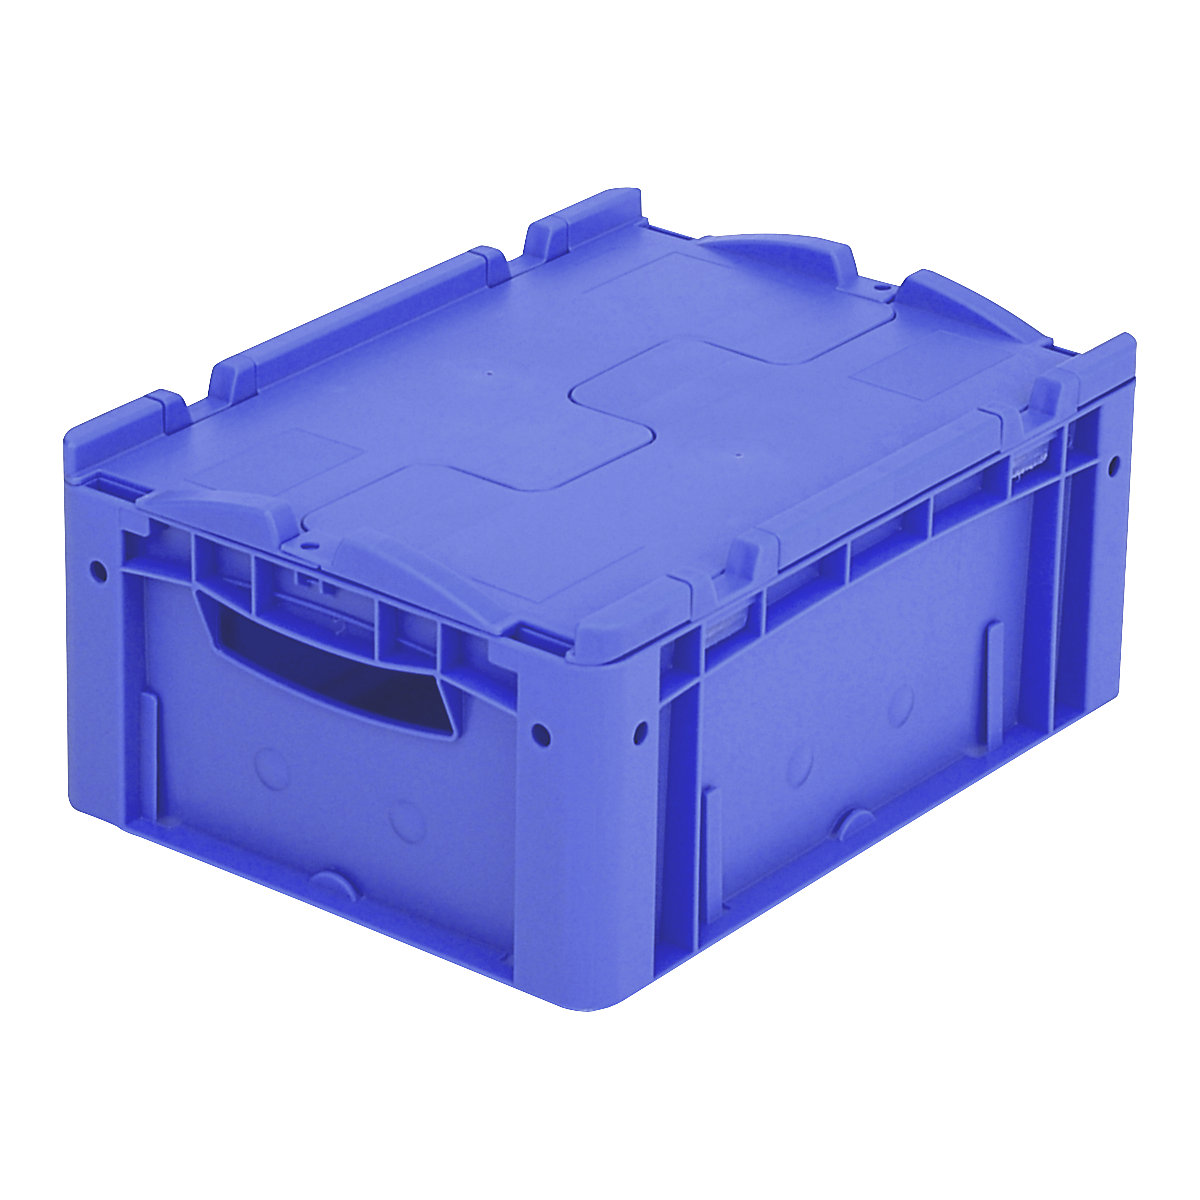 XL Euro stacking container – BITO, with 2-section hinged lid, LxWxH 400 x 300 x 188 mm-1